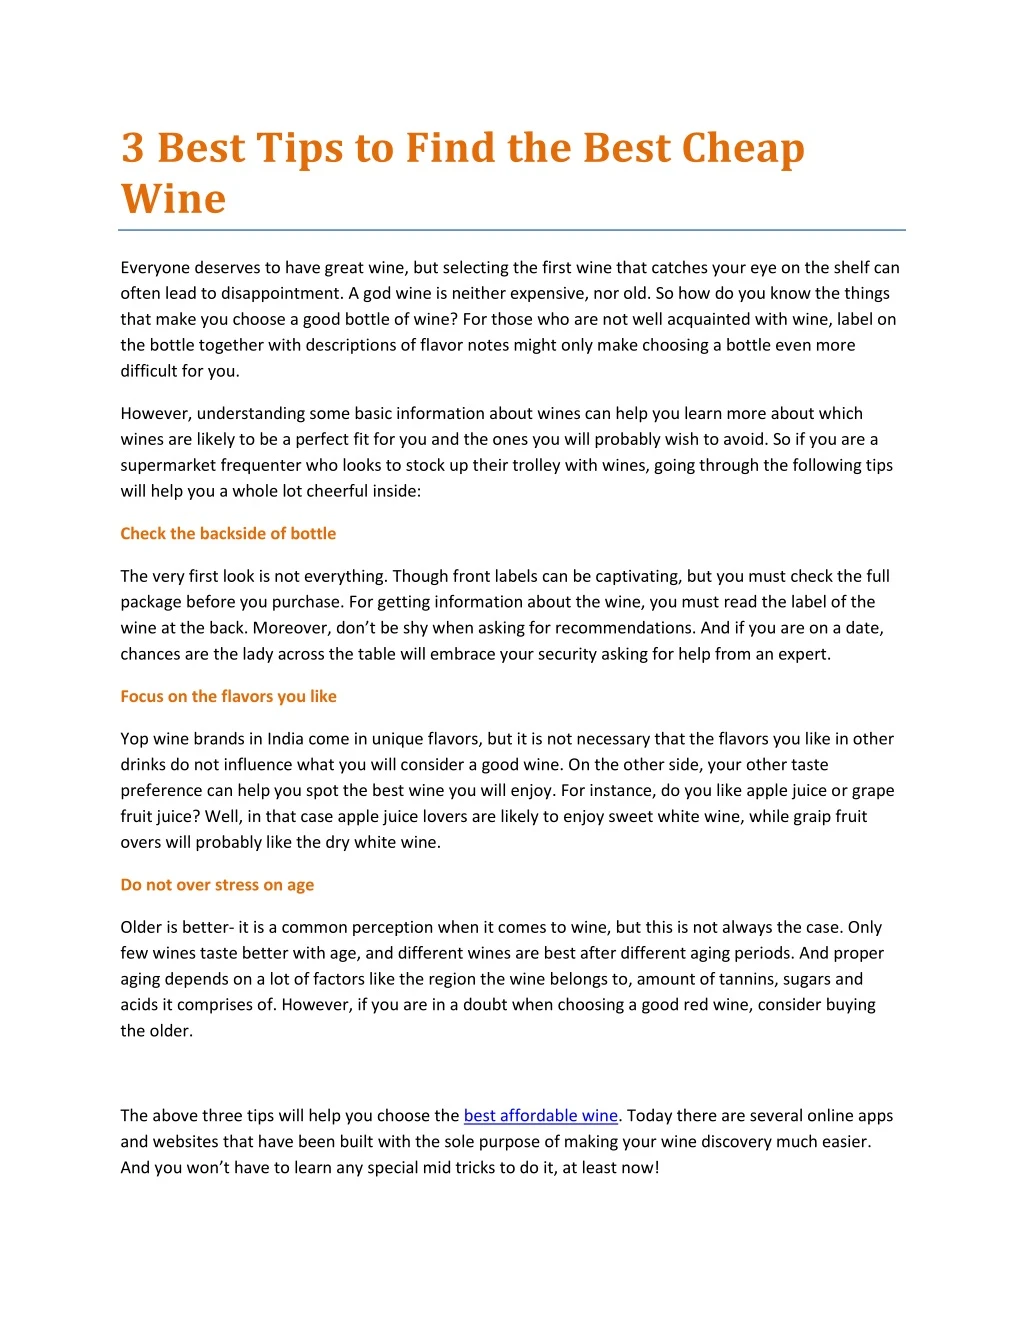 3 best tips to find the best cheap wine